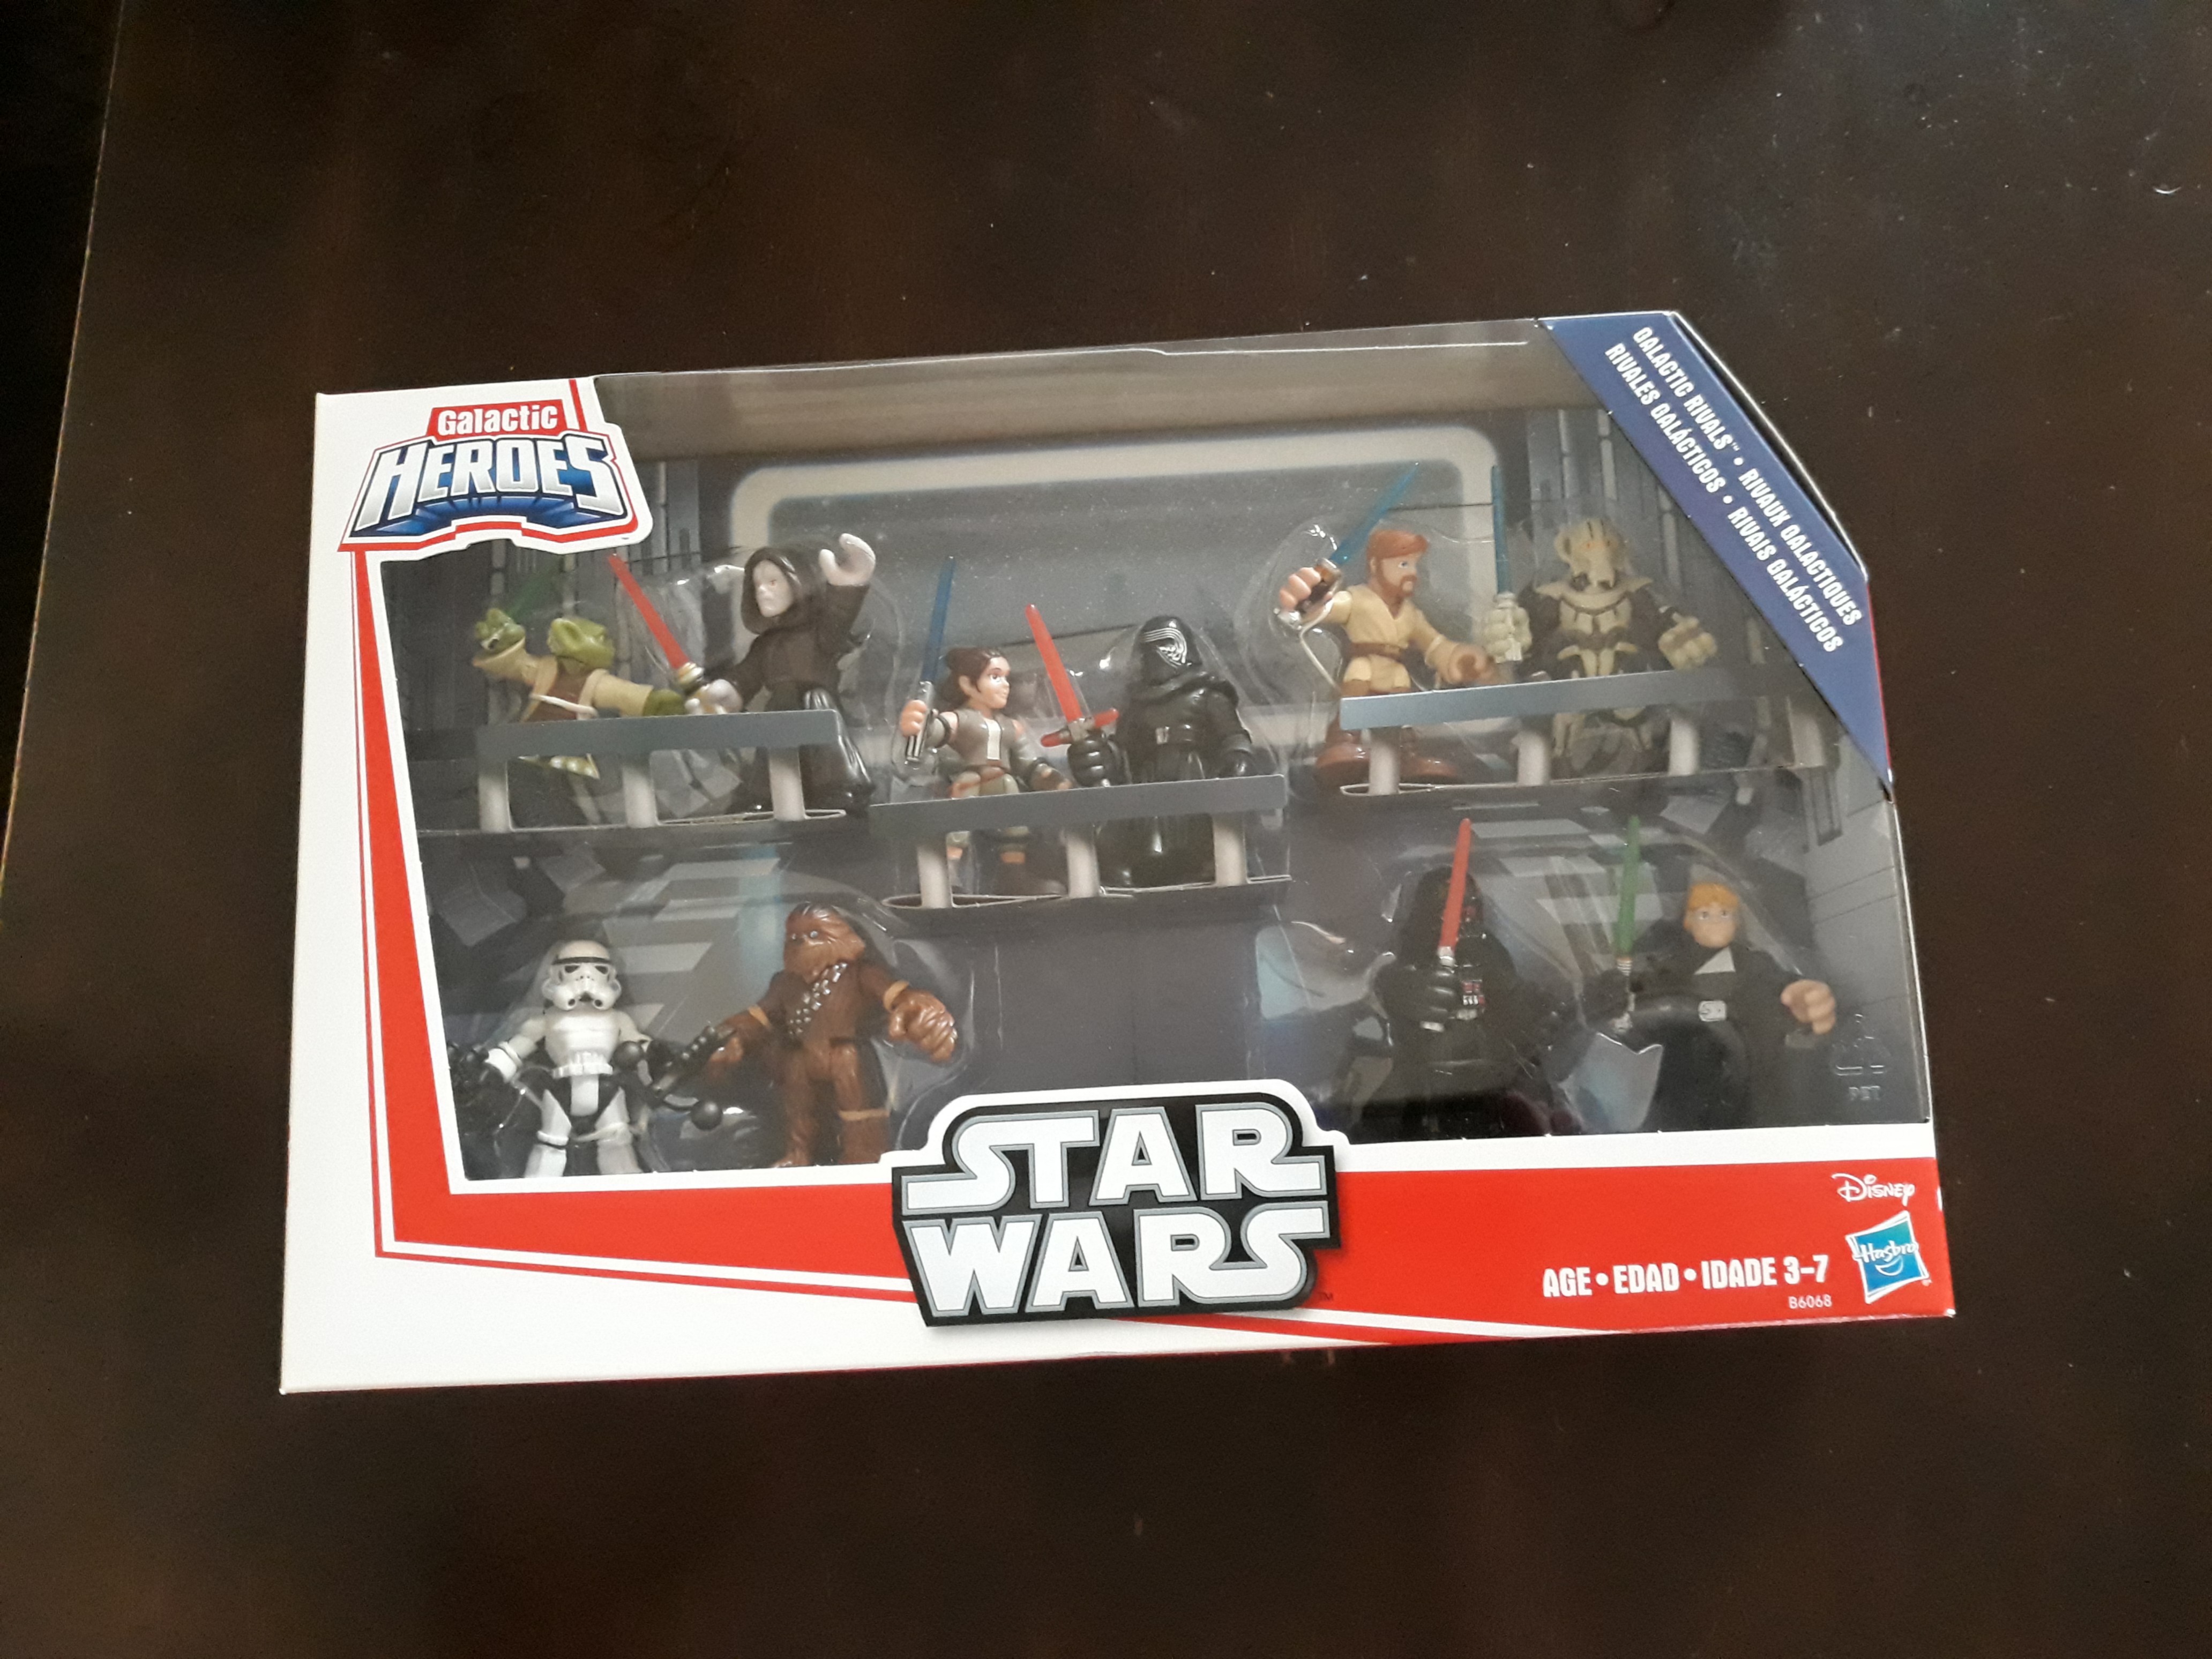 star wars galactic heroes galactic rivals action figure